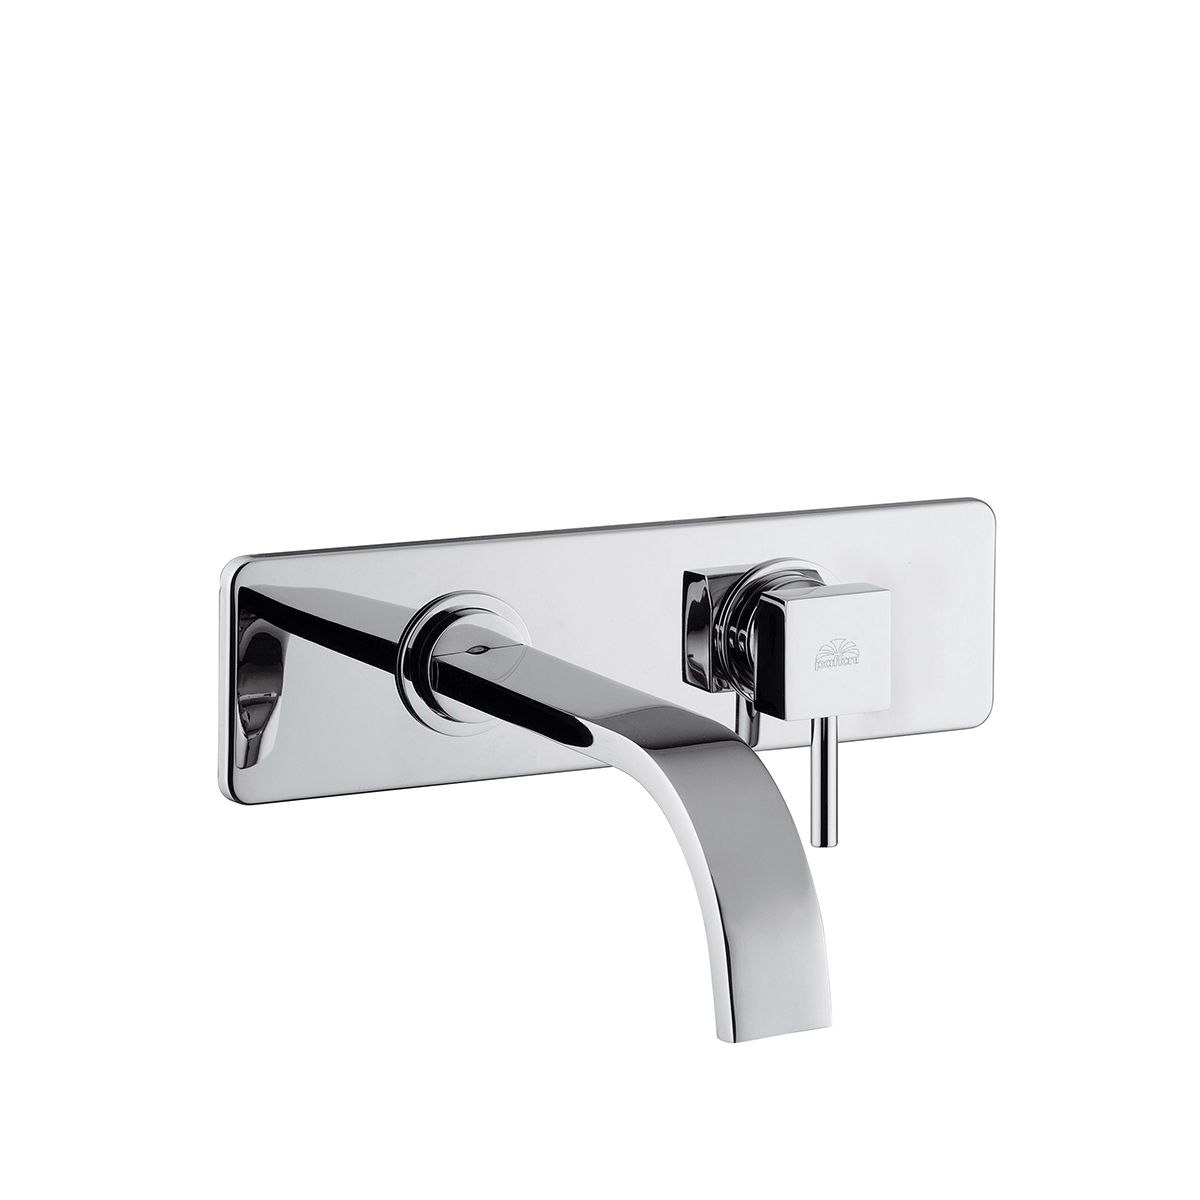 Faucet Types - Wall Mounted Faucet